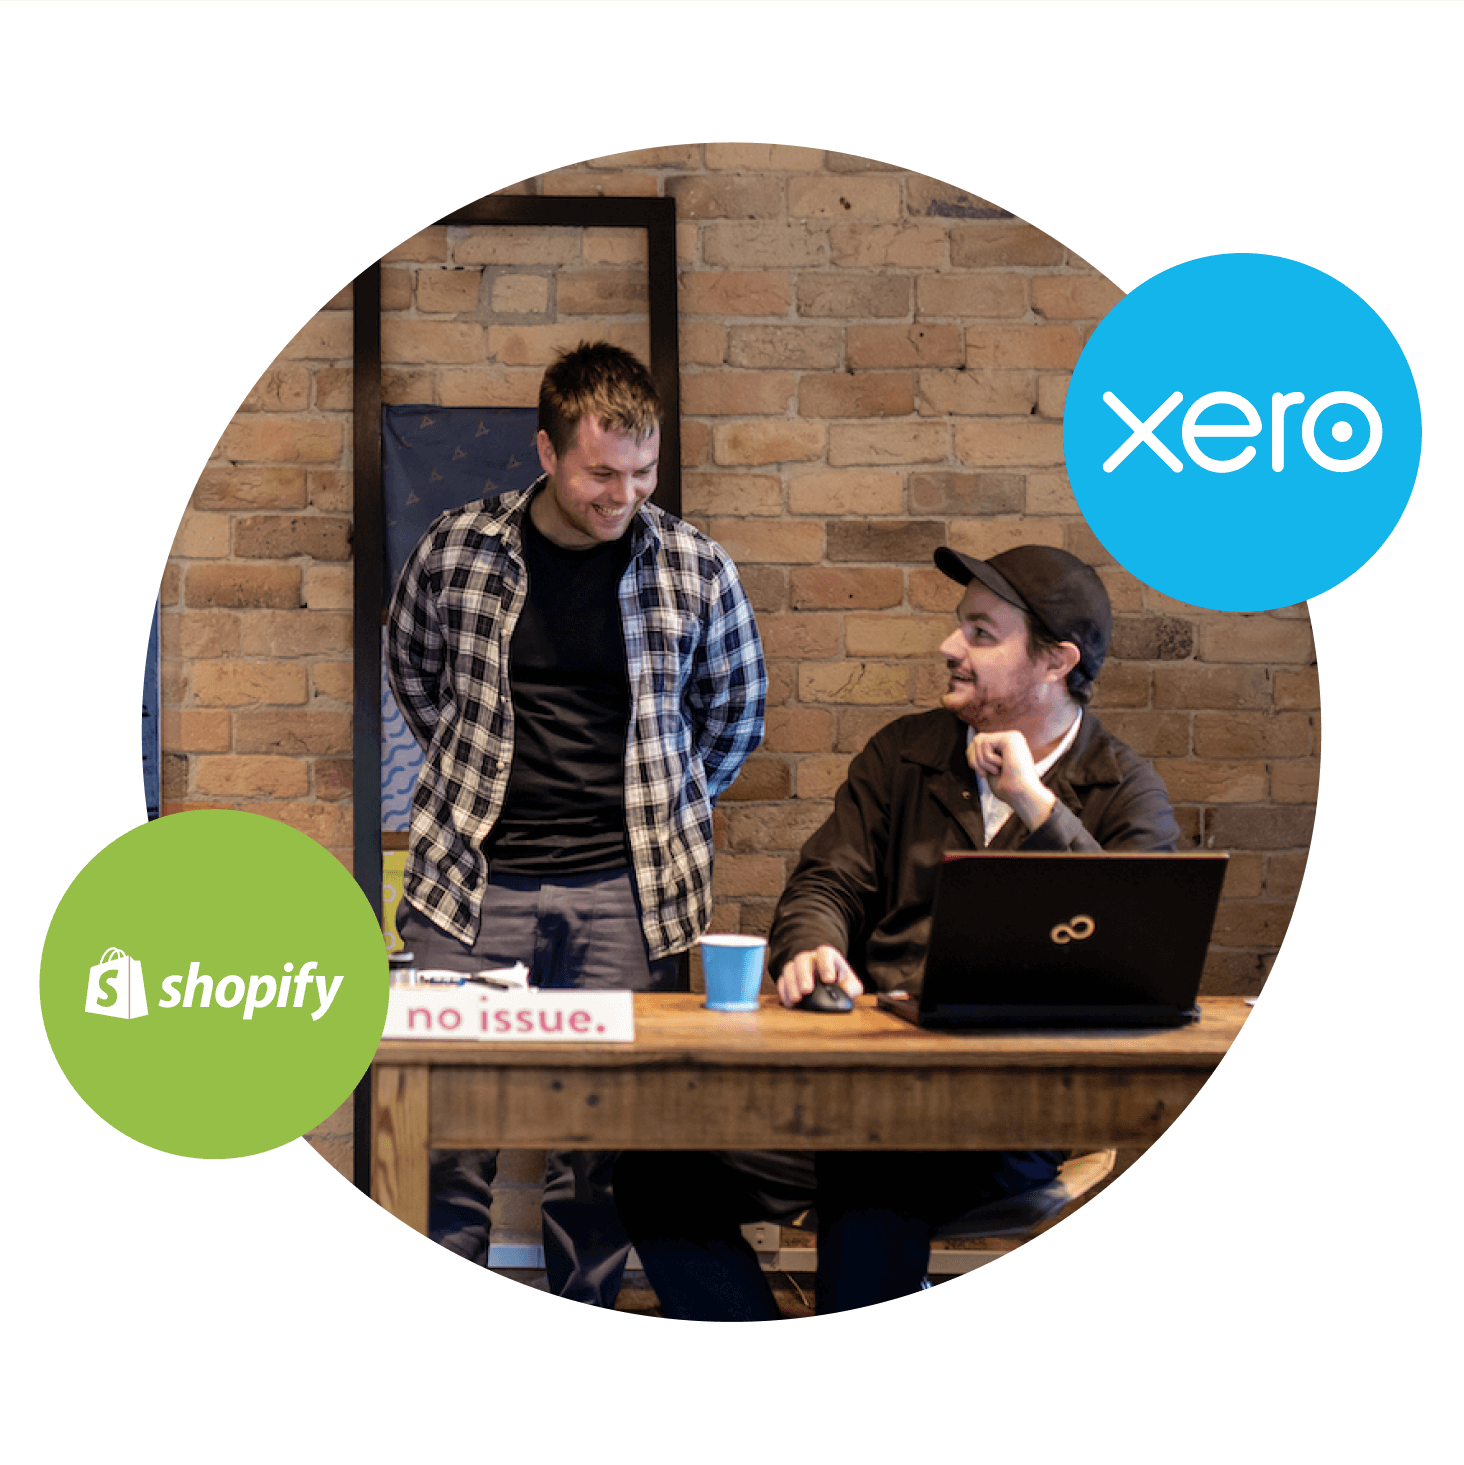 Two Singaporean ecommerce sellers chat about the increase in sales since using Shopify and Xero for their online store.